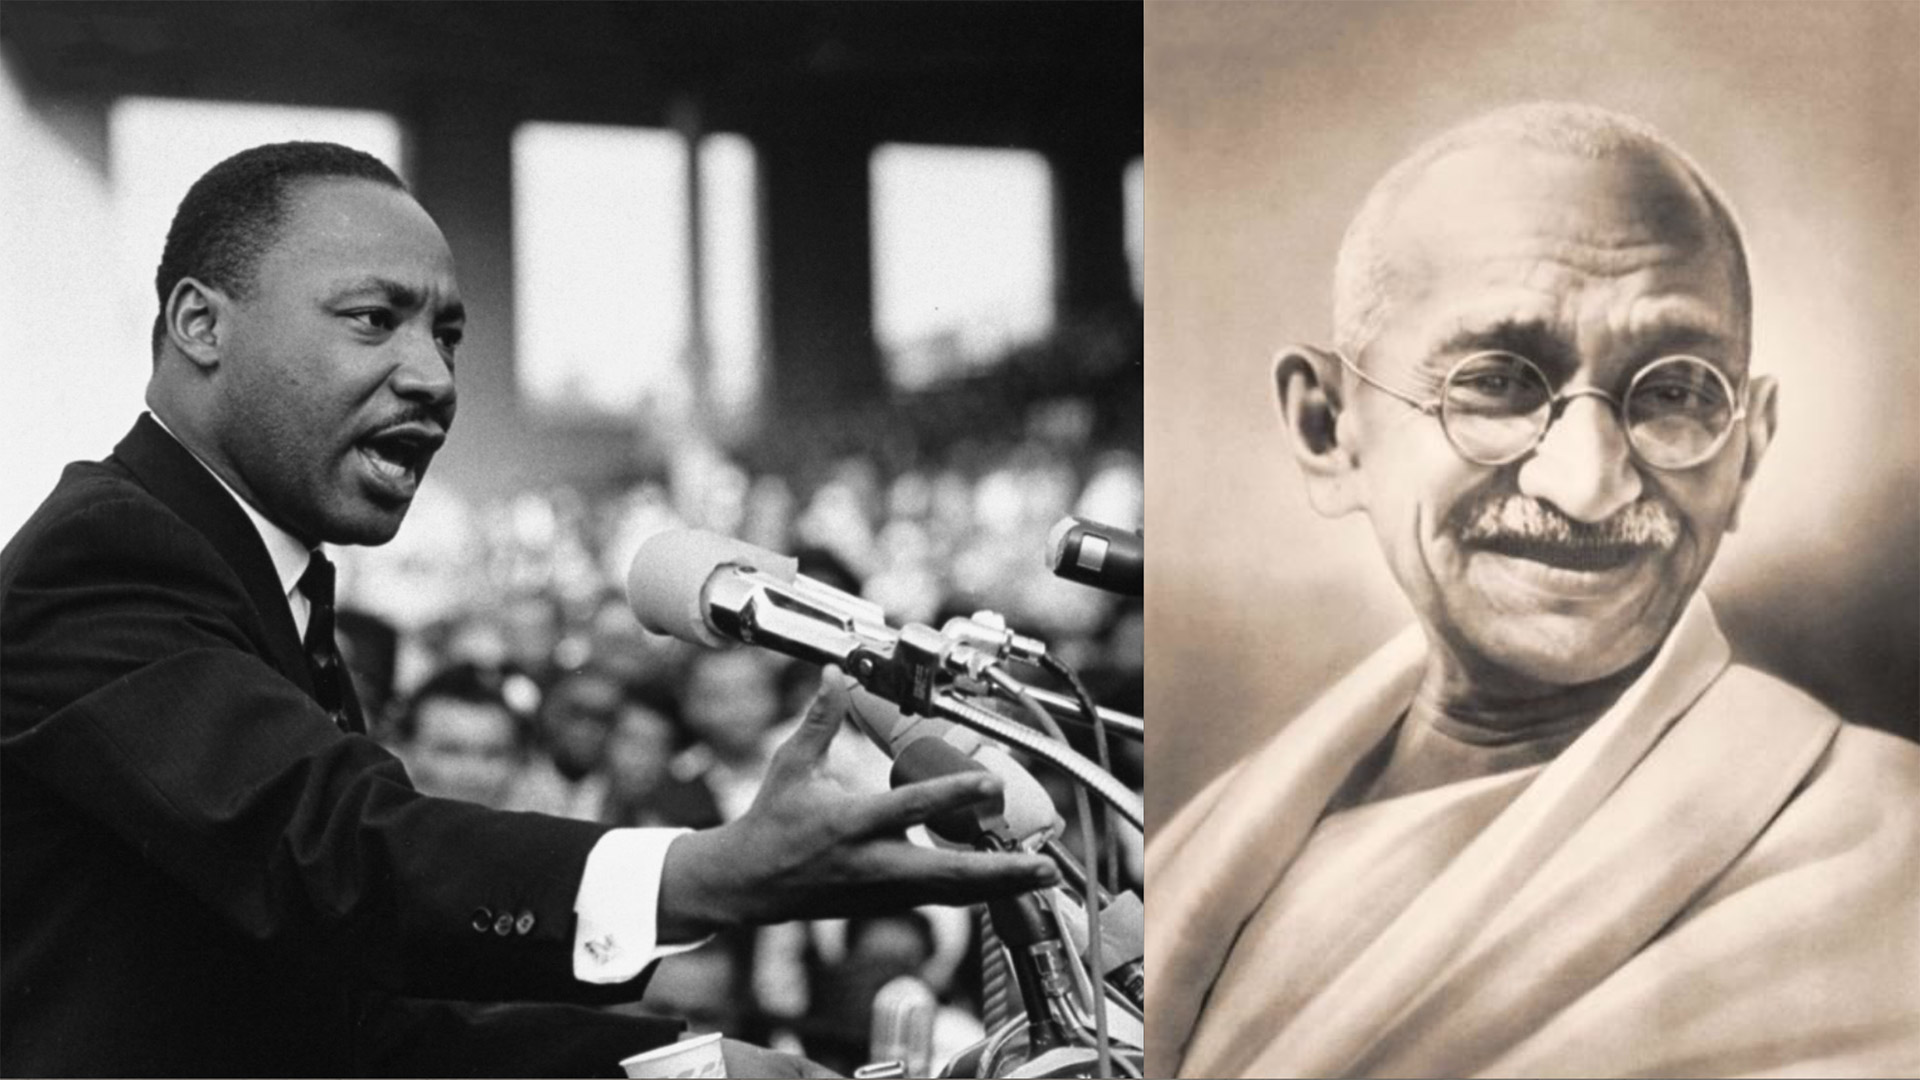 Split image of Martin Luther King Jr speaking in front of a crowd and a sepia-toned portrait sketch of Mahatma Gandhi